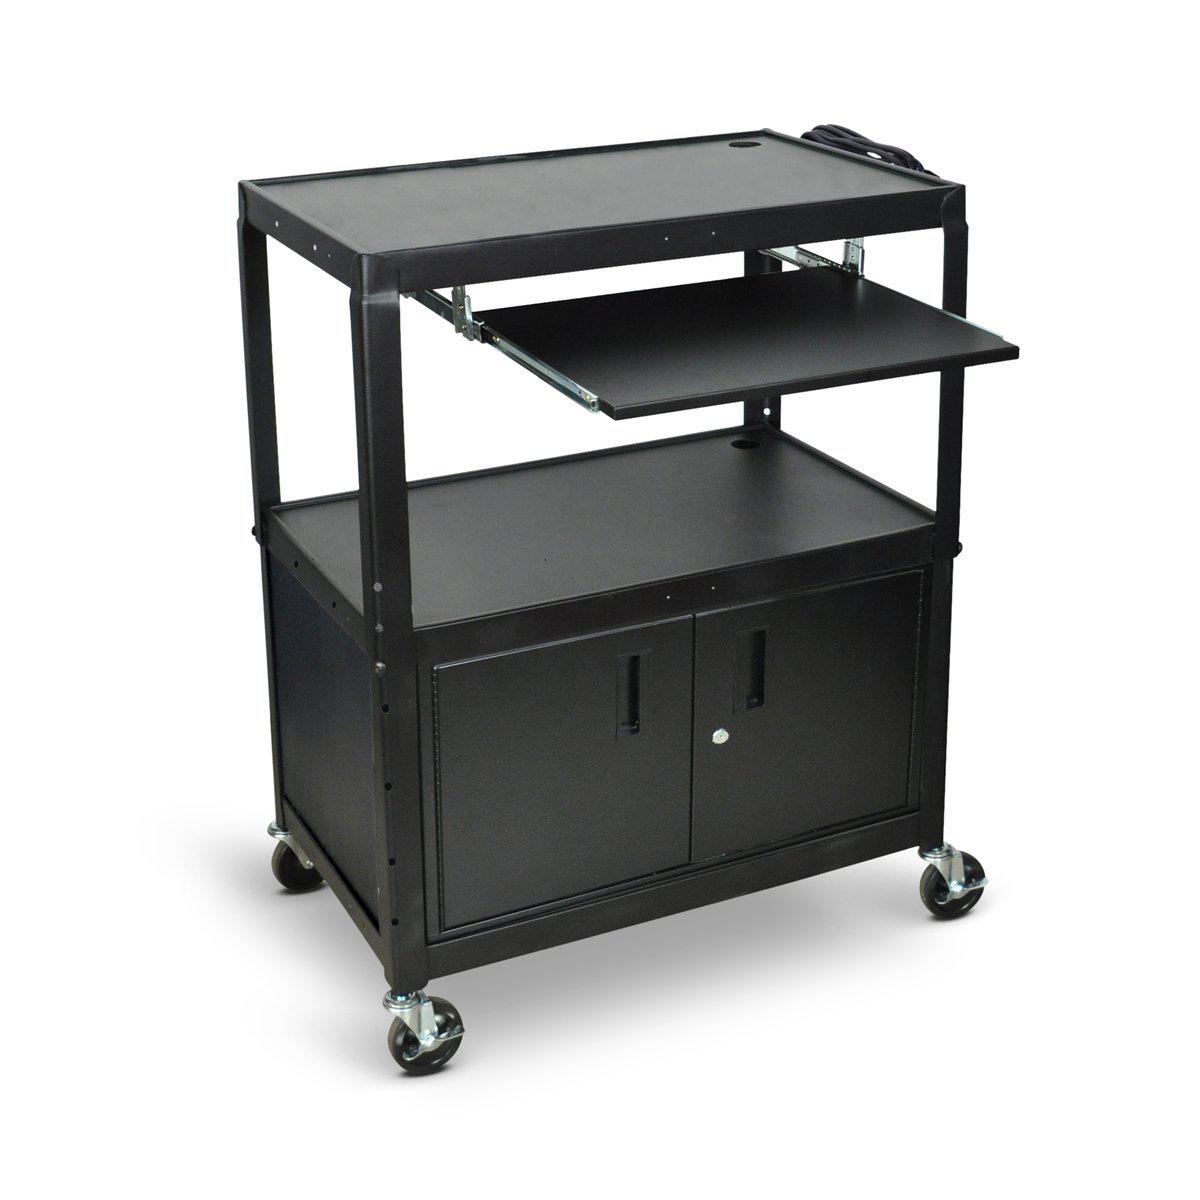 Extra Large Adjustable-Height Steel AV Cart with Cabinet and Pullout Keyboard Tray